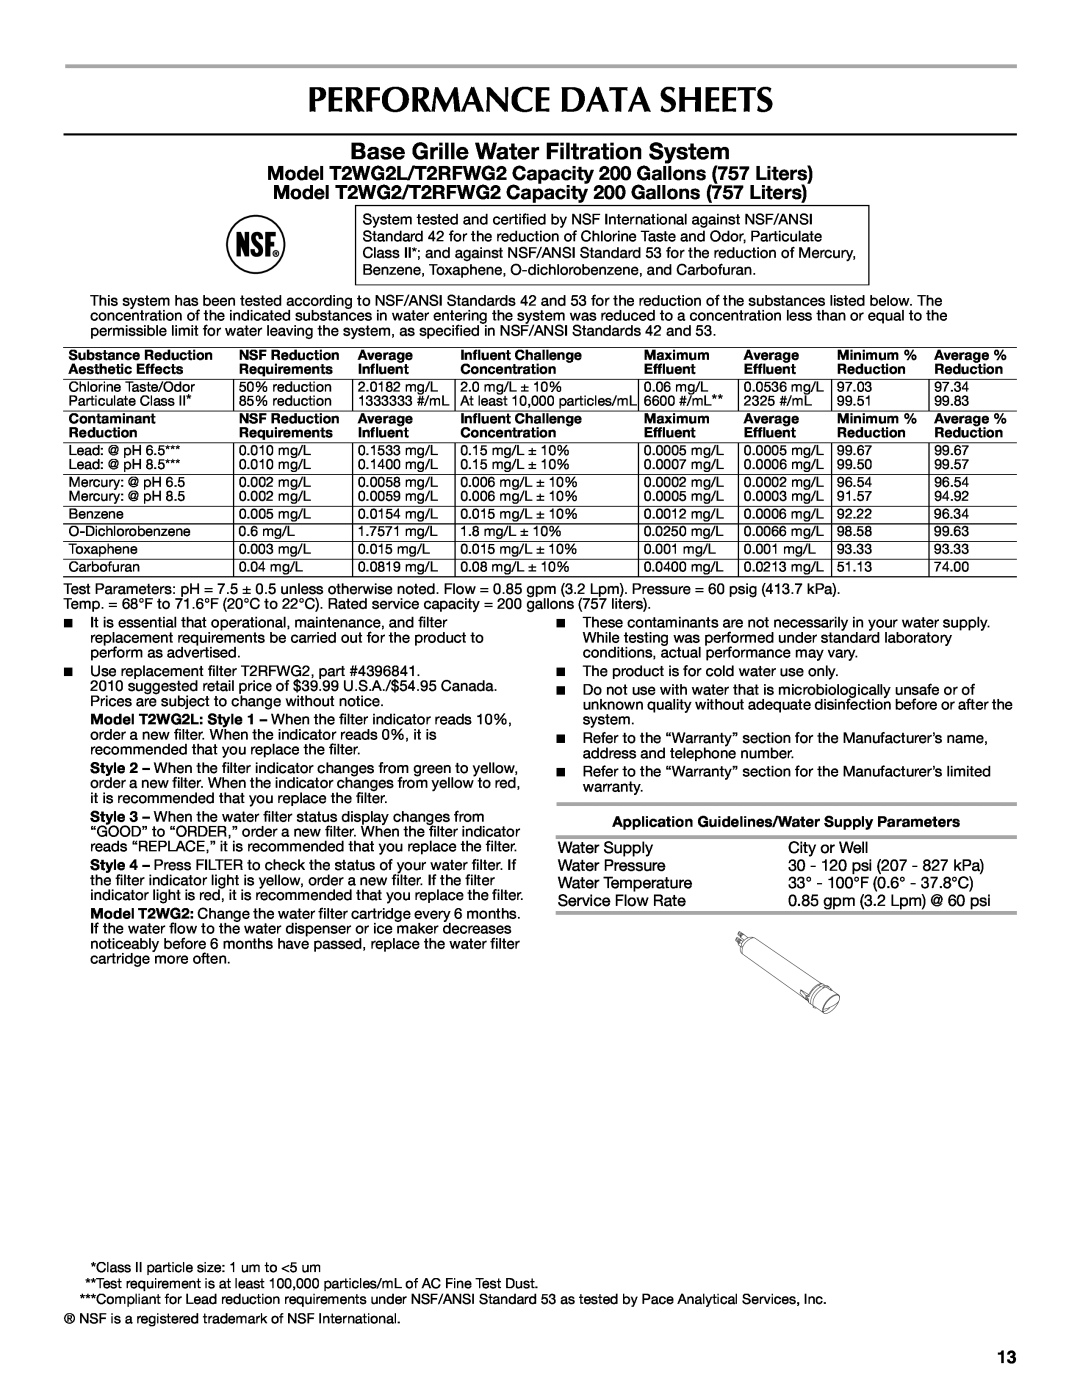 Maytag W10321475A installation instructions Performance Data Sheets, Base Grille Water Filtration System 